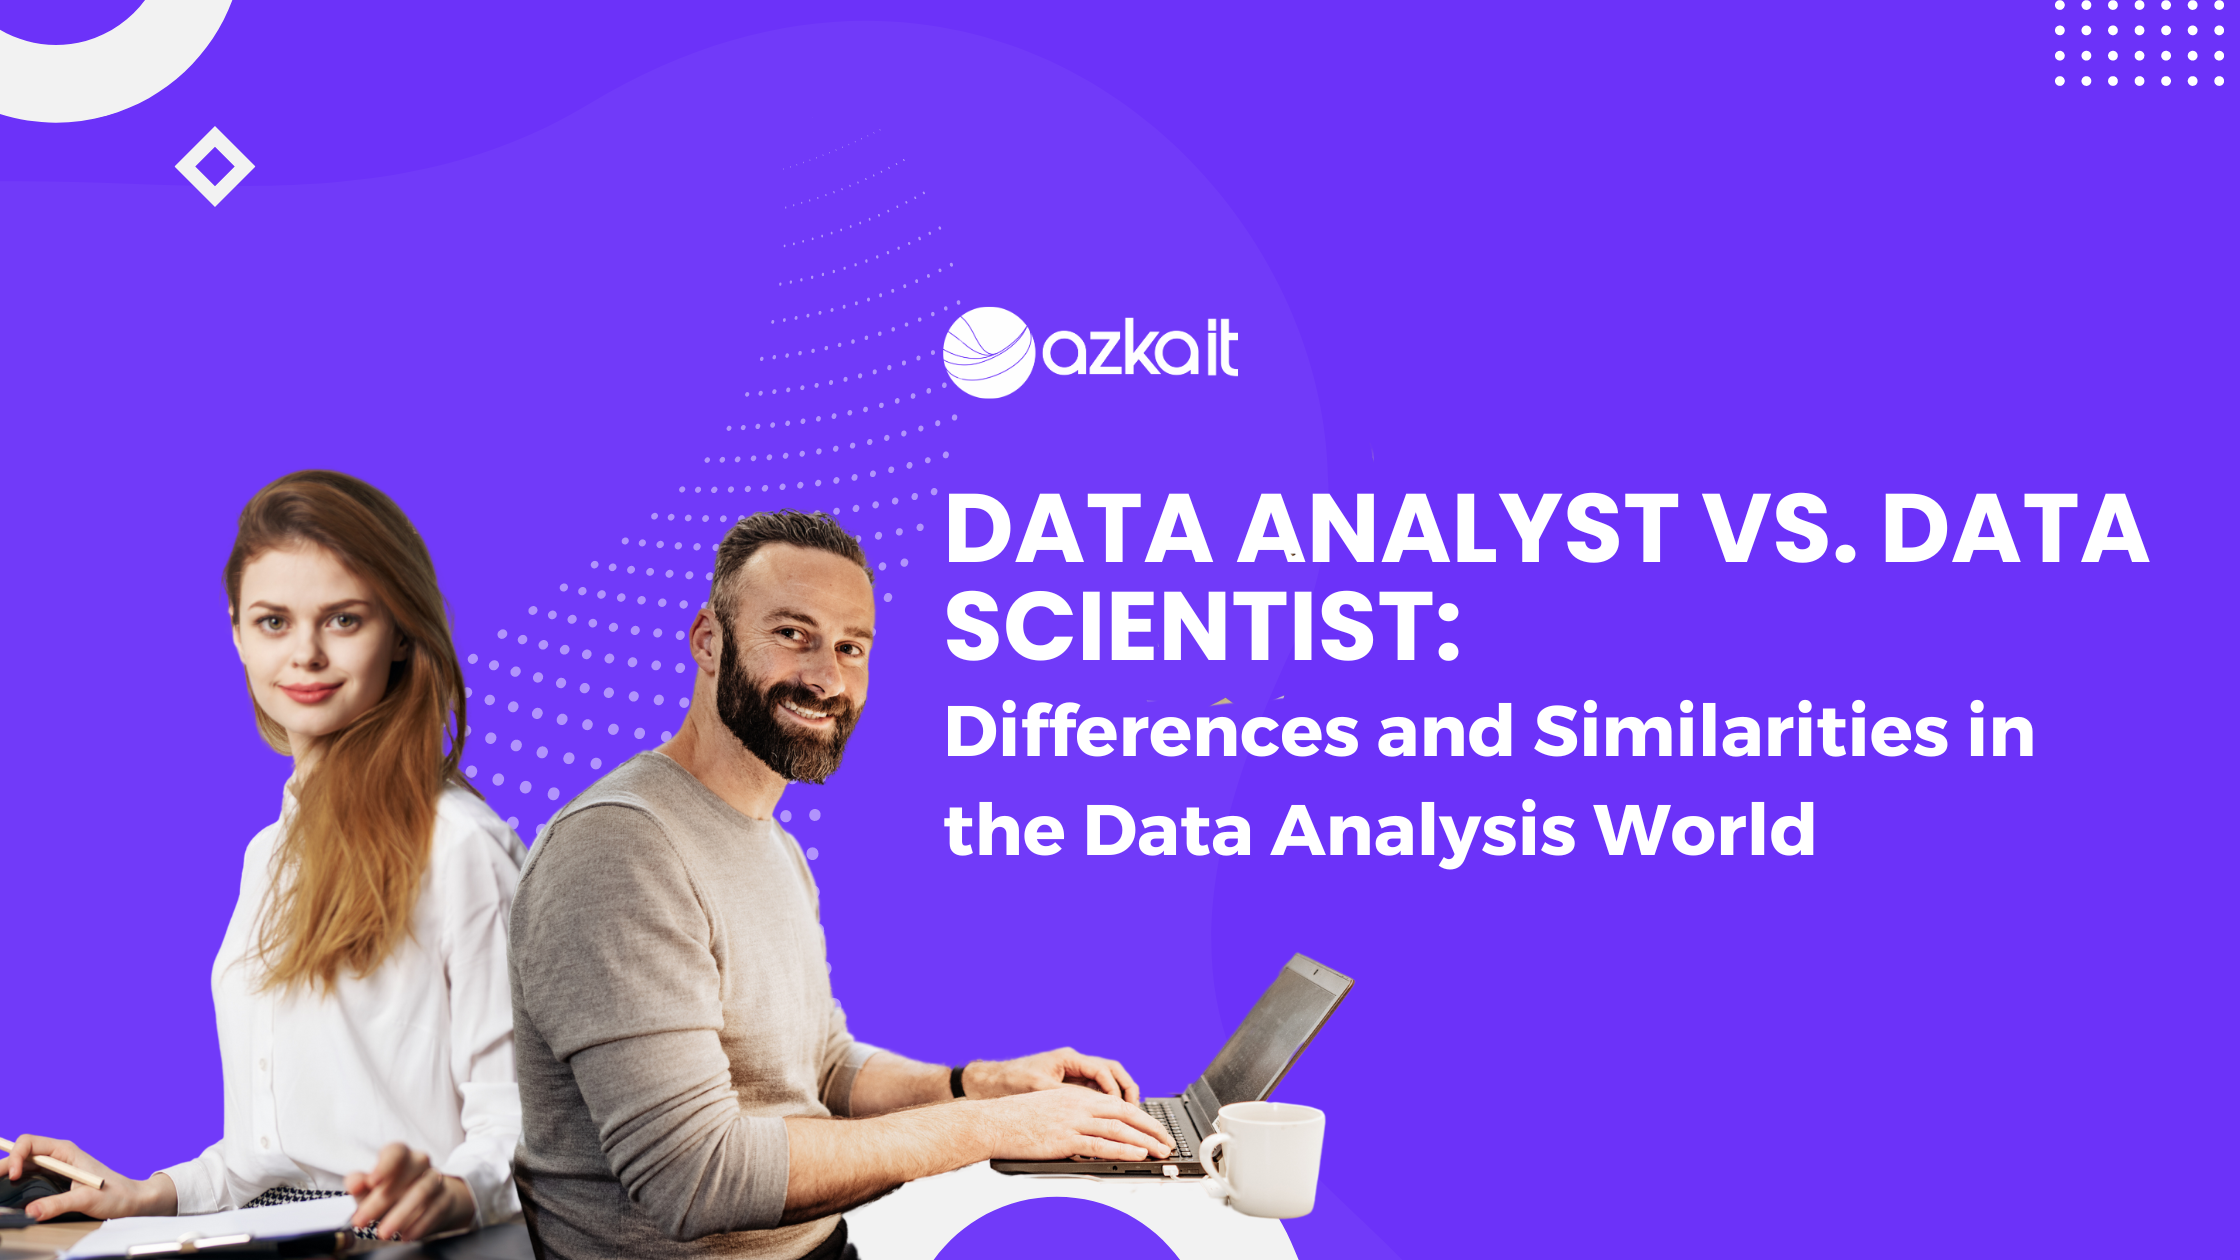 Data Analyst vs. Data Scientist: Differences and Similarities in the Data Analysis World